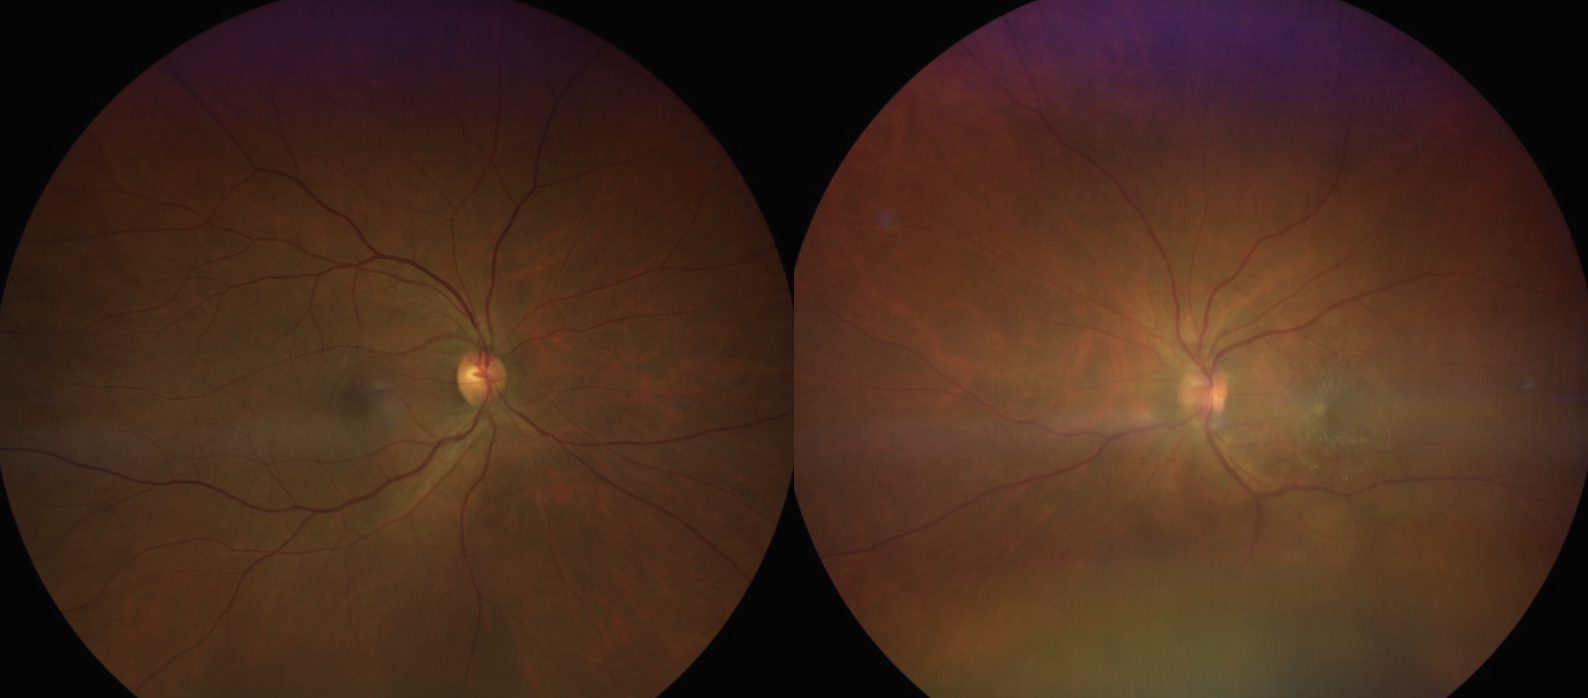 Fig. 2. In these fundus photos, the right eye (left image) appears unremarkable, while the left eye (right image) shows a hazy view with disc edema and an epiretinal membrane.